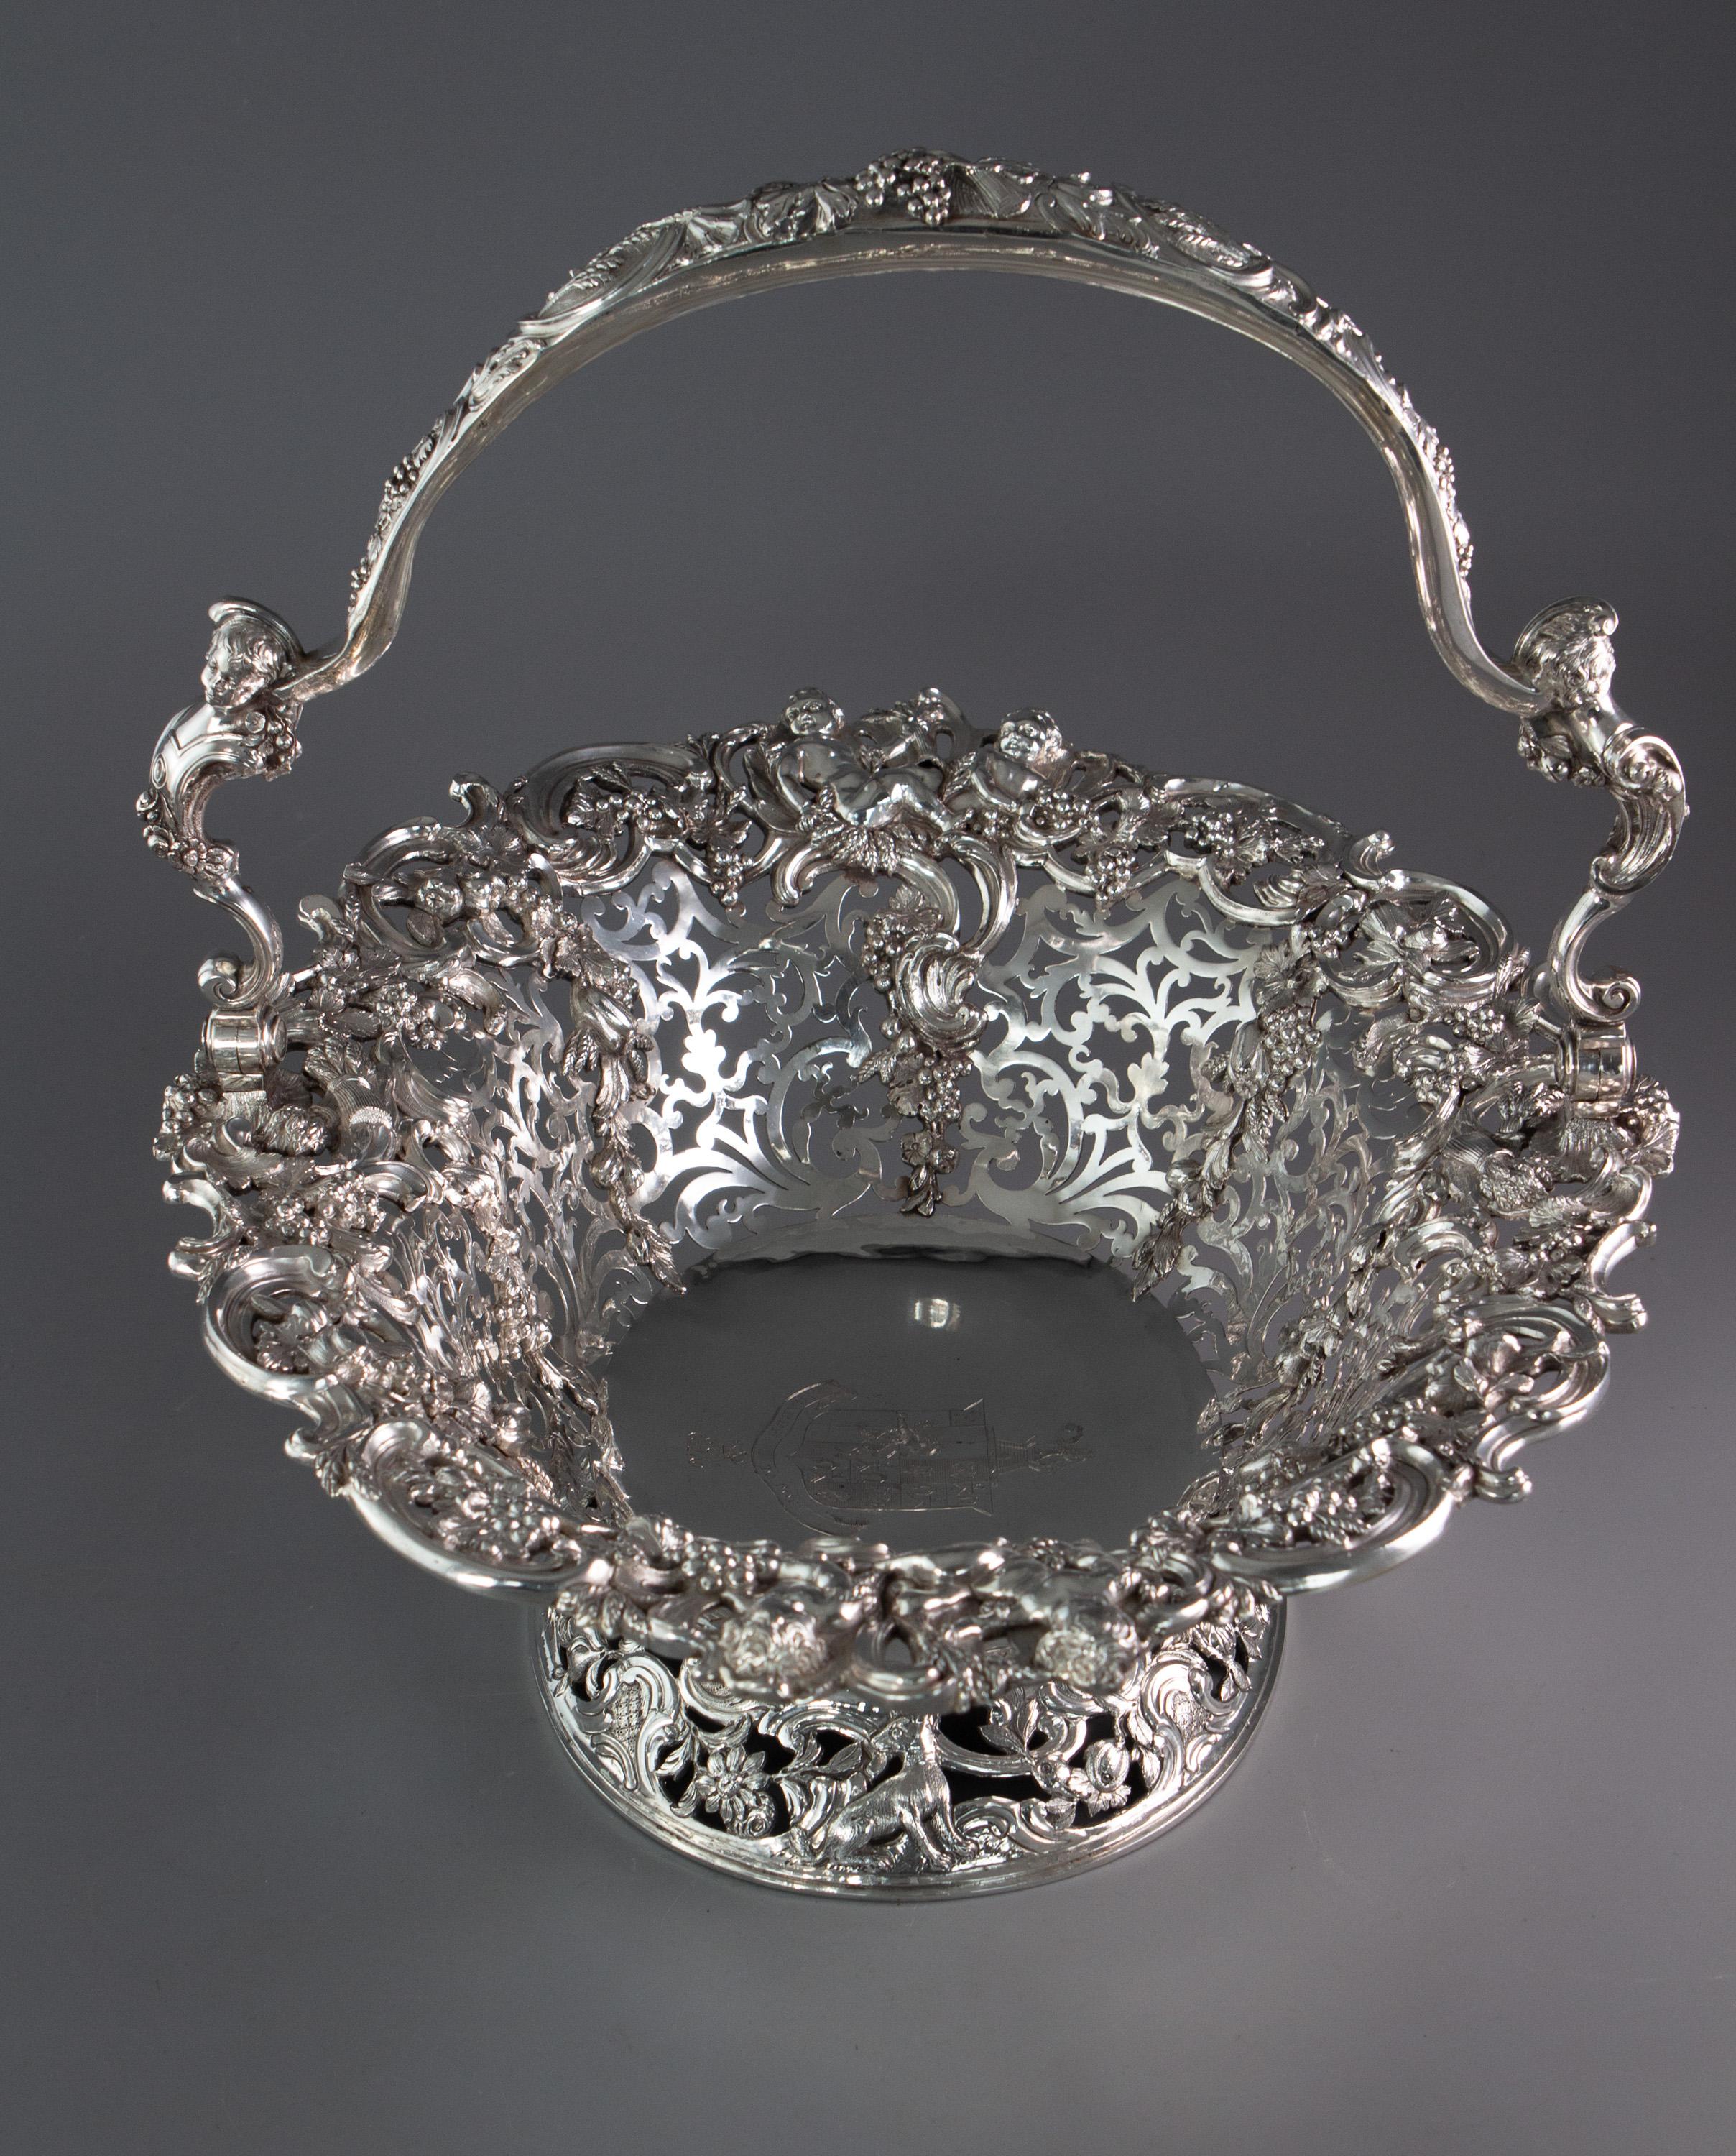 Hand-Crafted Royal Interest, a George II Silver Harvest Basket London 1759, by William Tuite For Sale